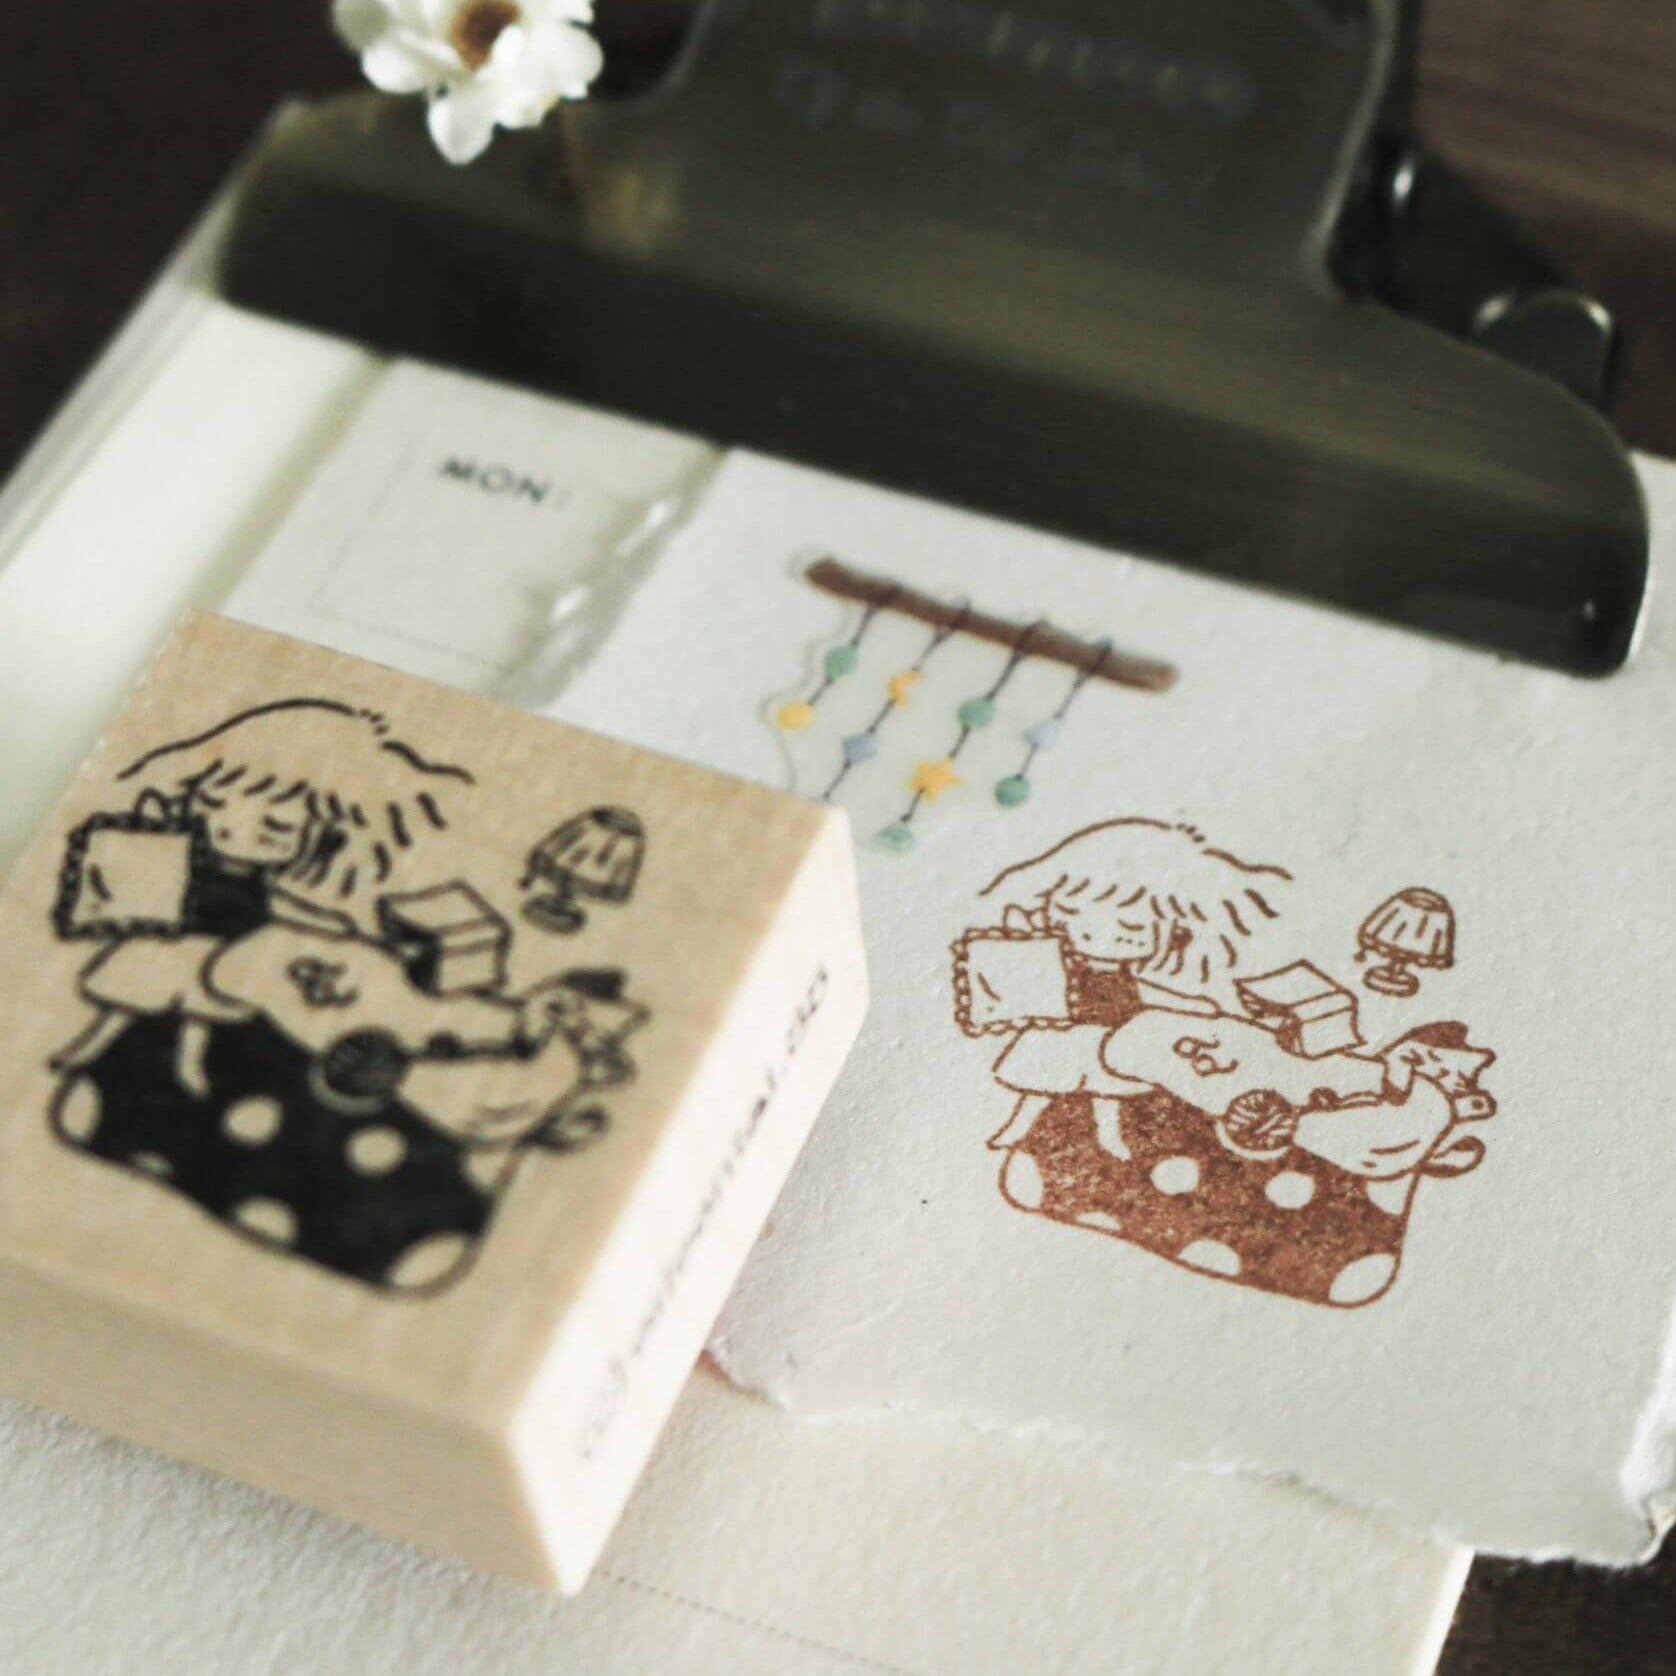 Micia Rubber Stamps Set: Bunny Numbers – Papergame